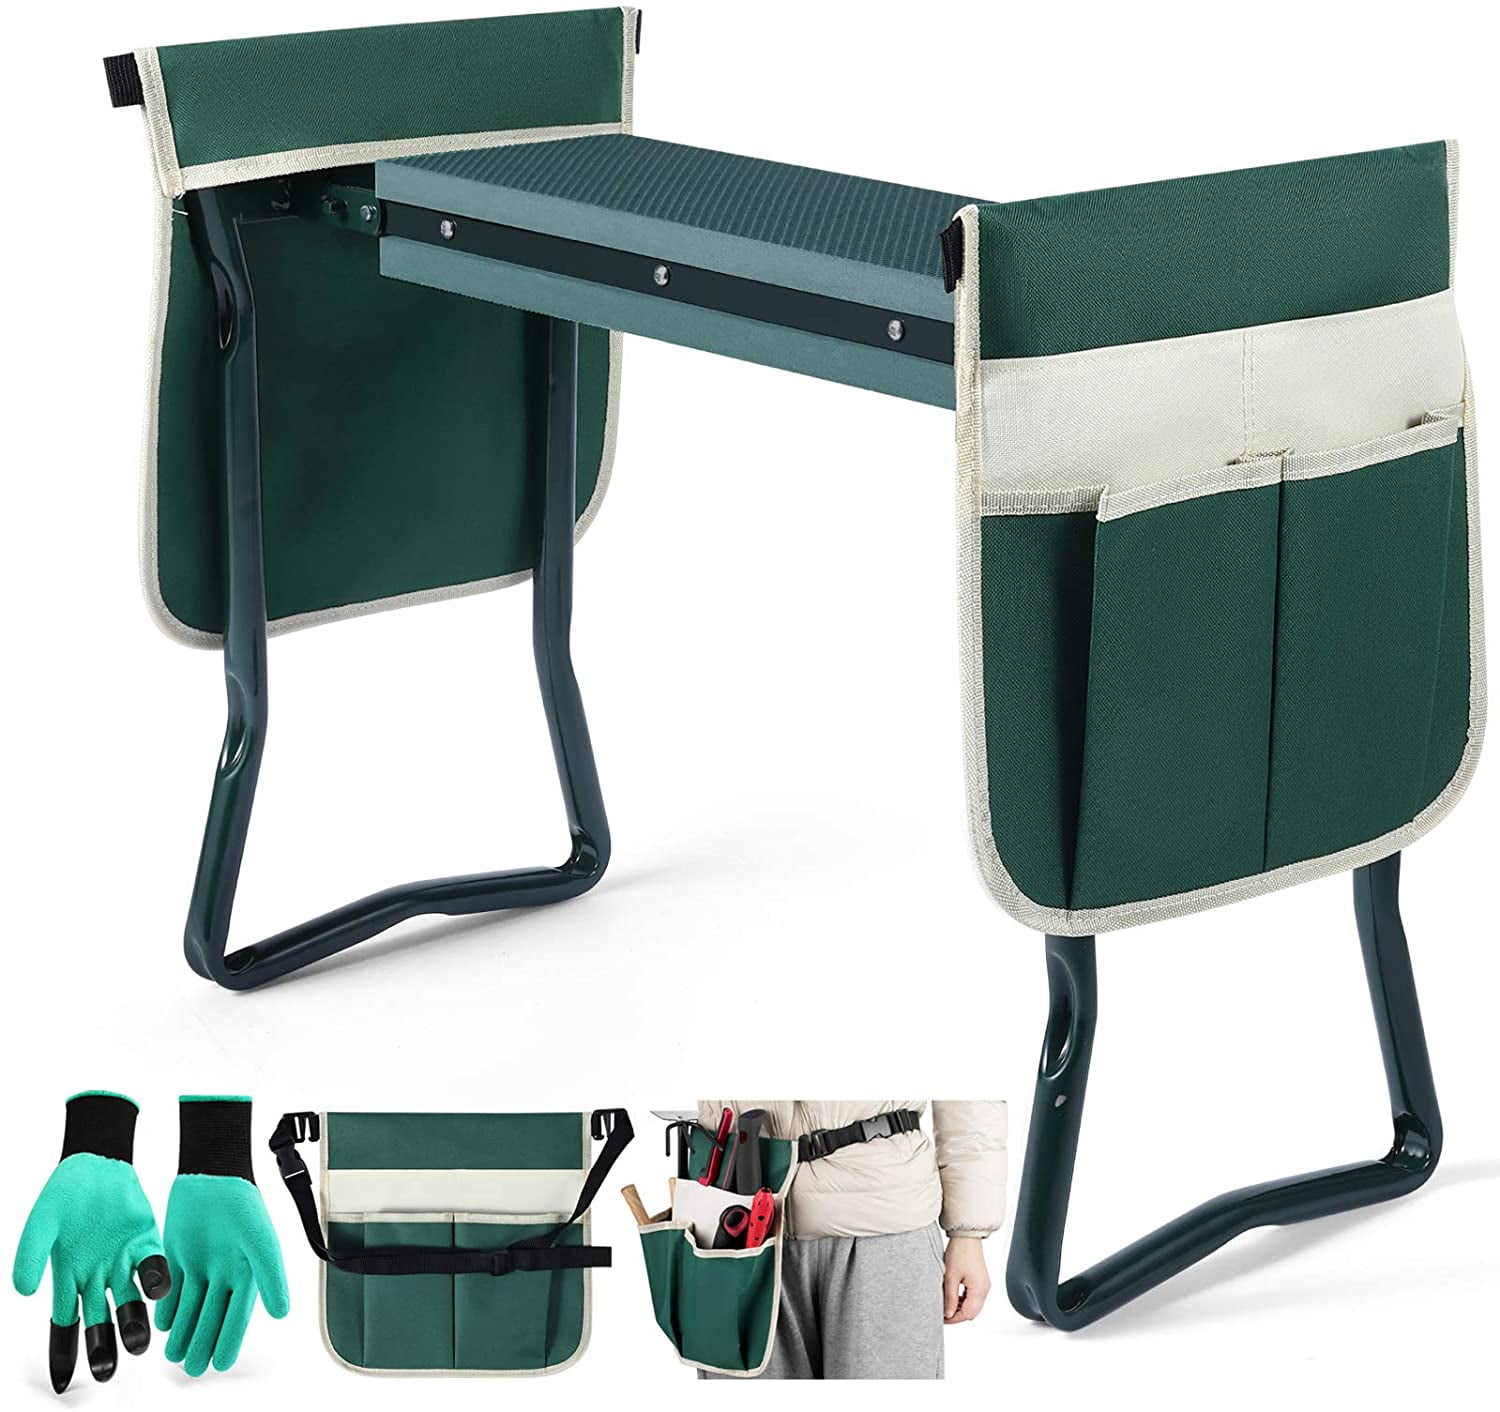 Garden Kneeler Seat w/ Kneeling Pad and Tool Pouch Folding Portable Bench 